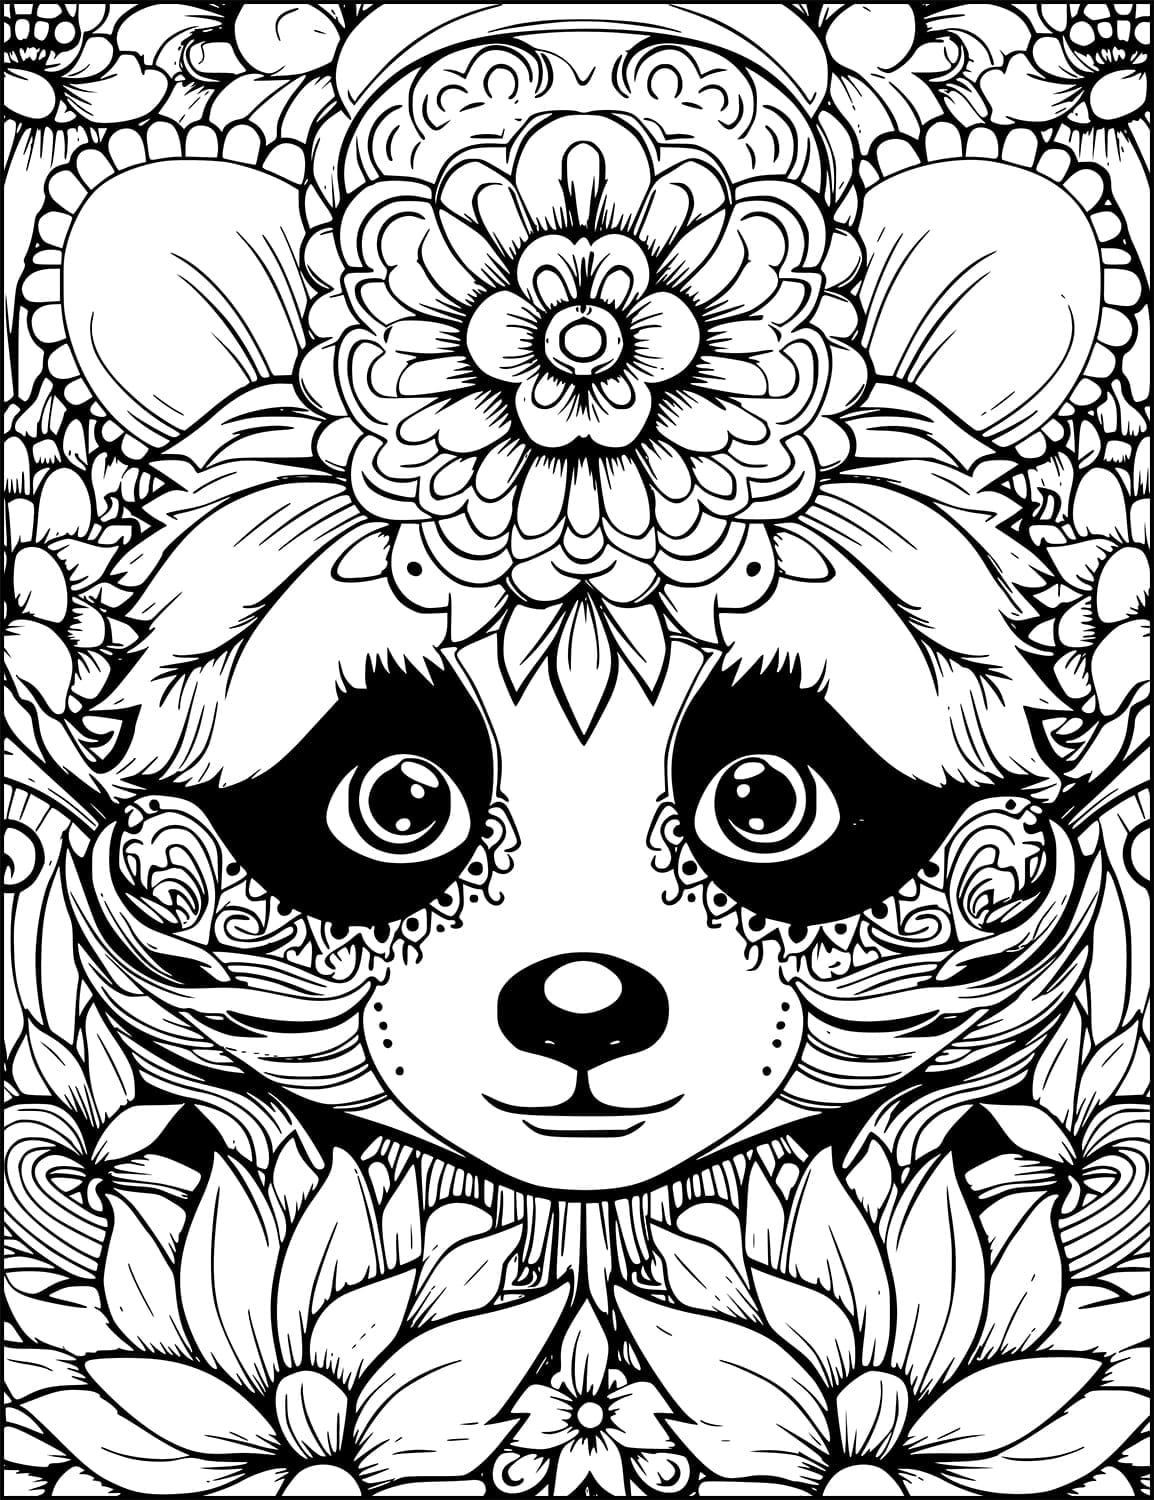 panda mandala zentangle and zen doodle style from animals and flowers adult coloring book 